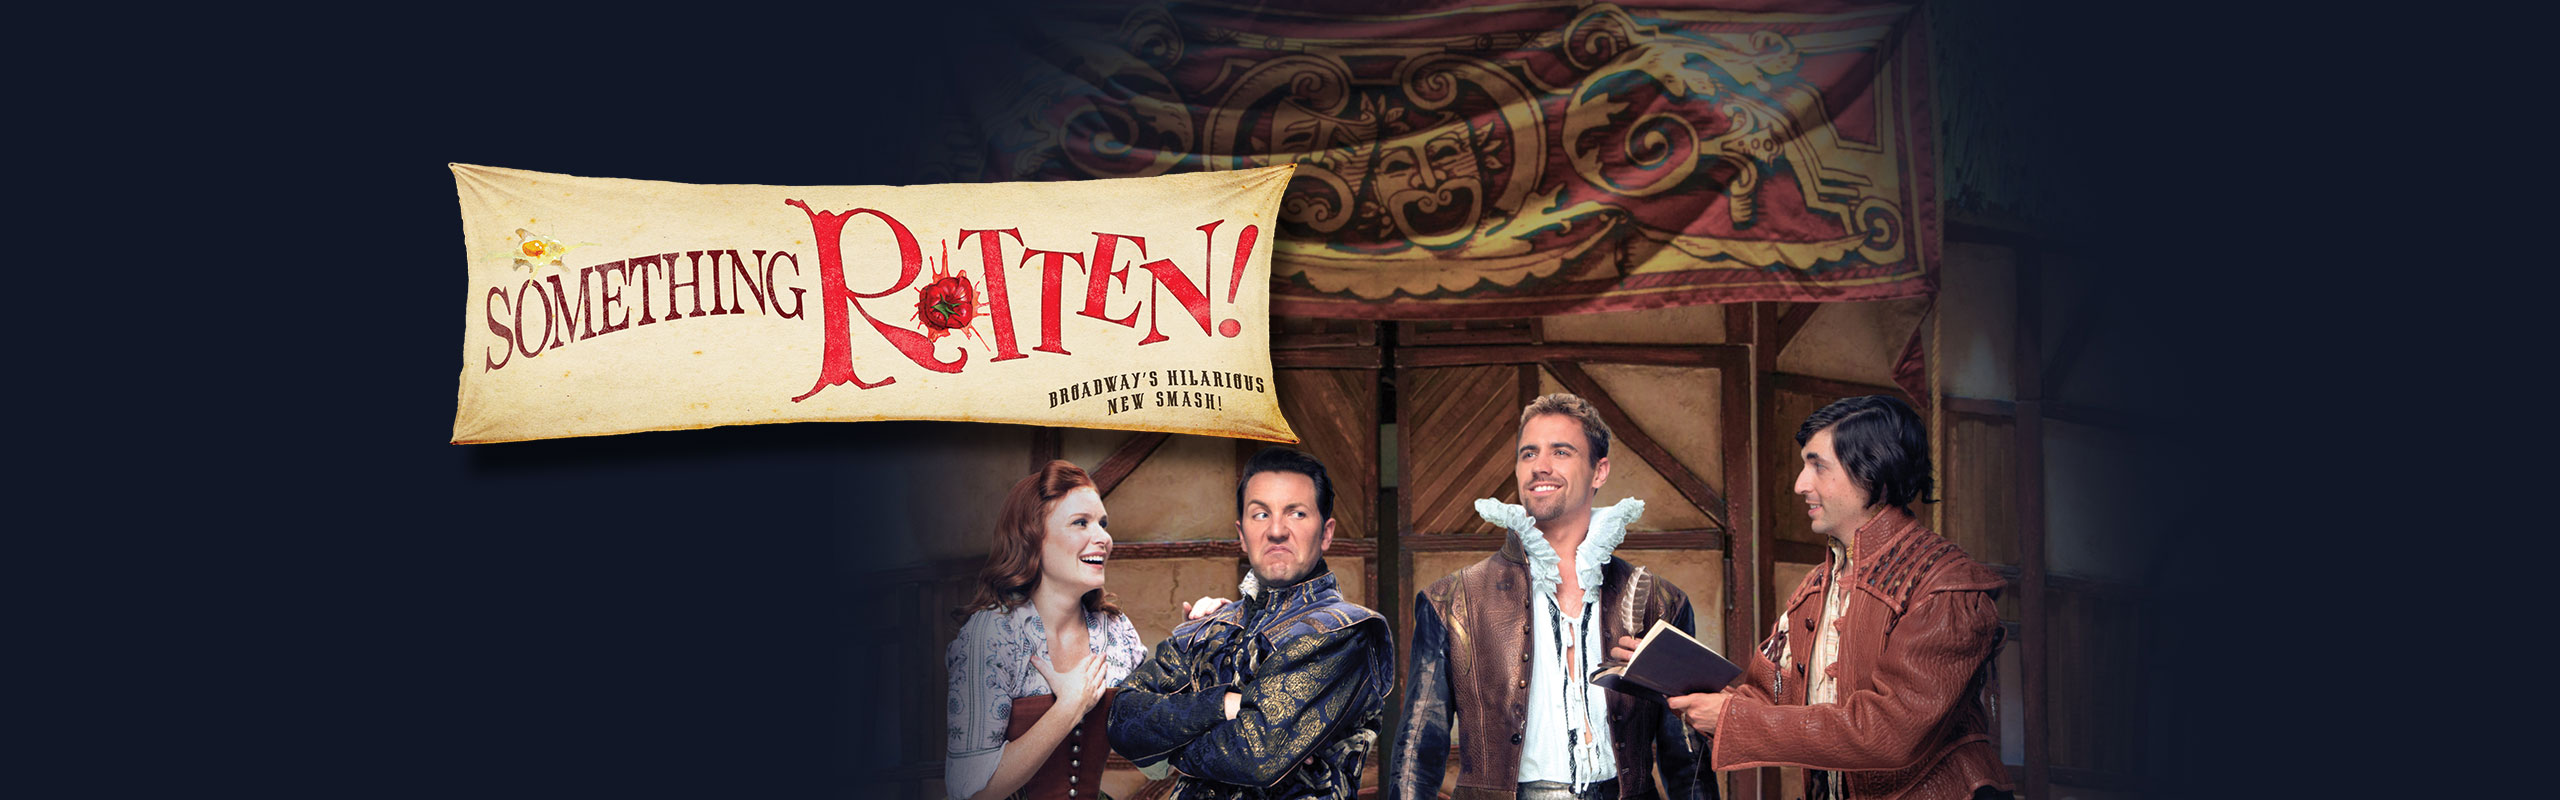 Pictuer of Something Rotten Musical - Performing Arts and Leadership